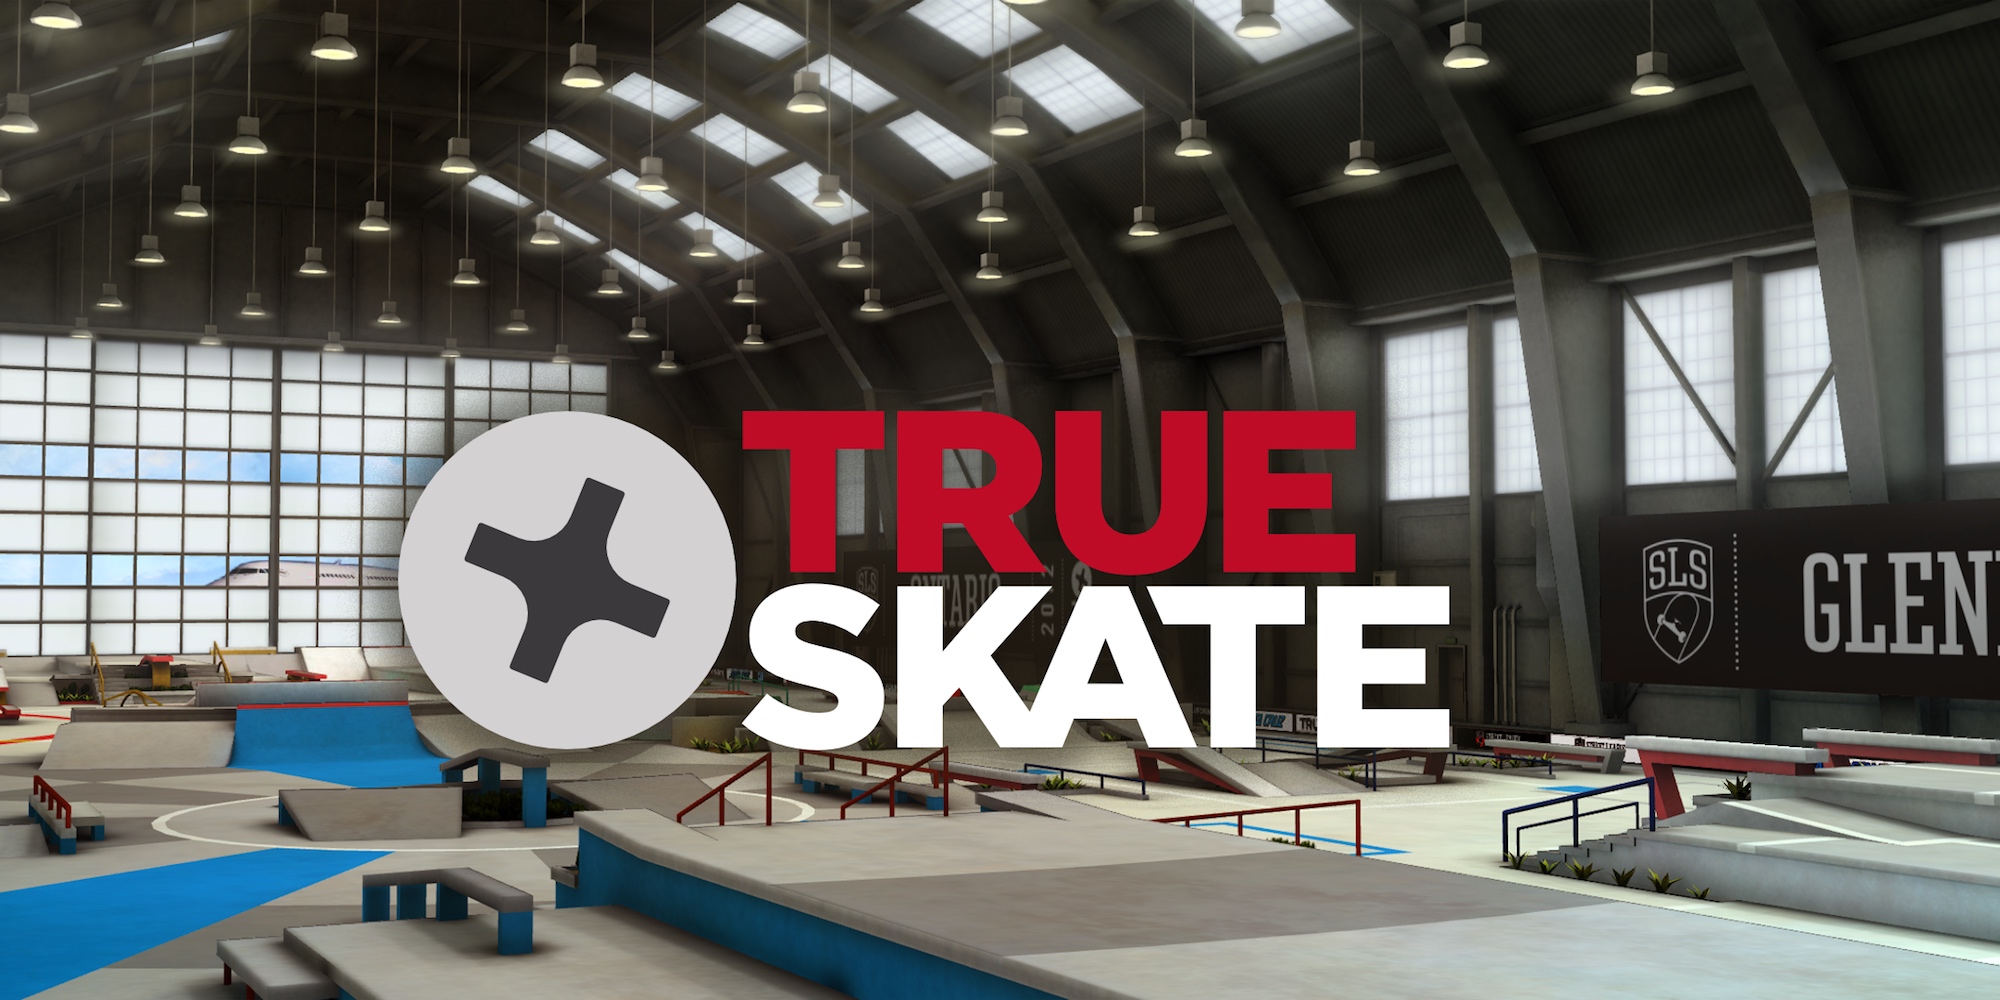 True Skate for Android - Download